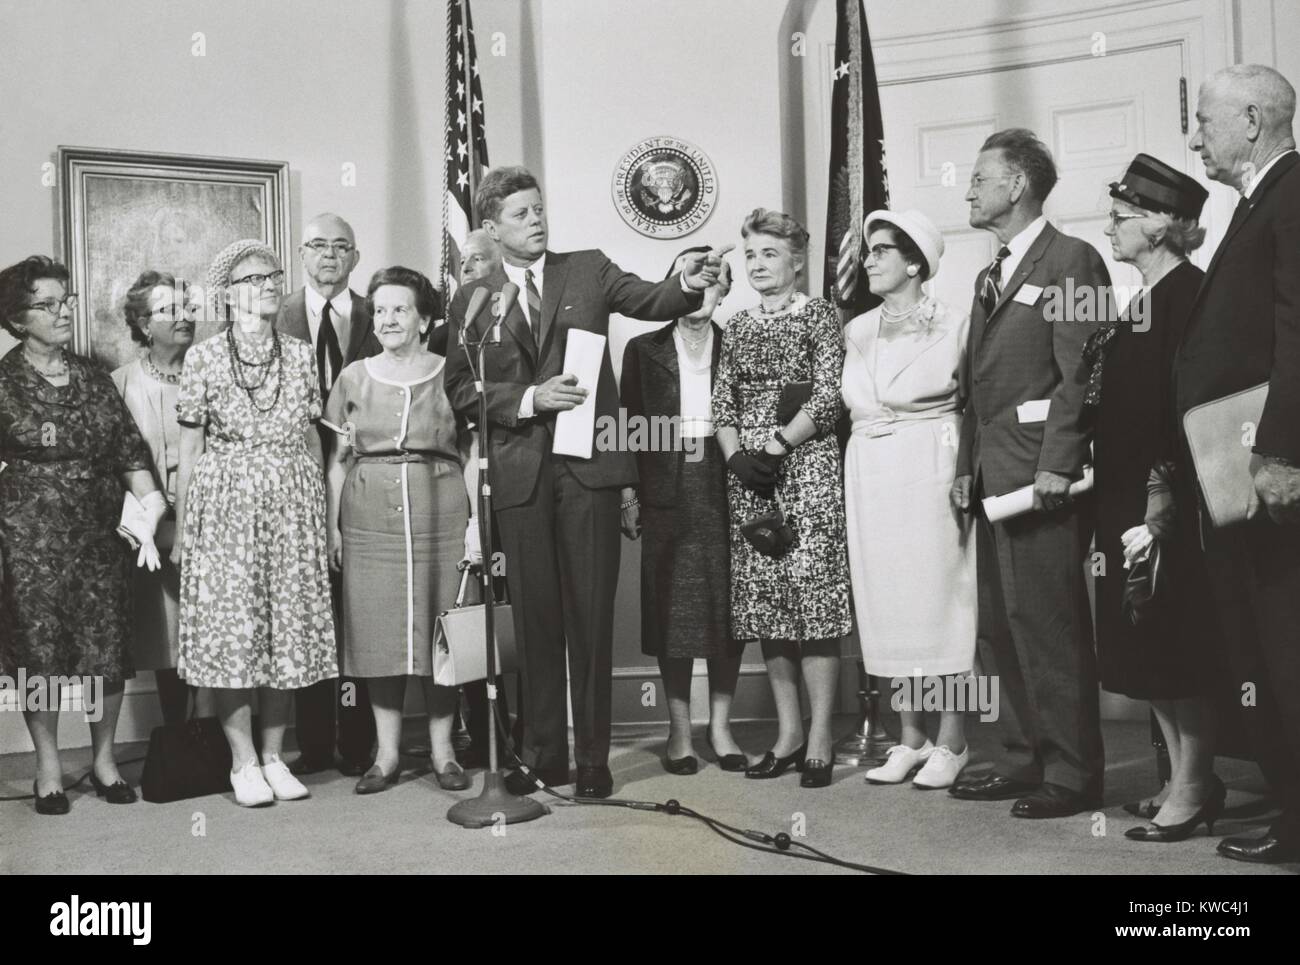 Older Peace Corps volunteers visit President John Kennedy at the White House. Aug. 30, 1962. (BSLOC 2015 2 226) Stock Photo